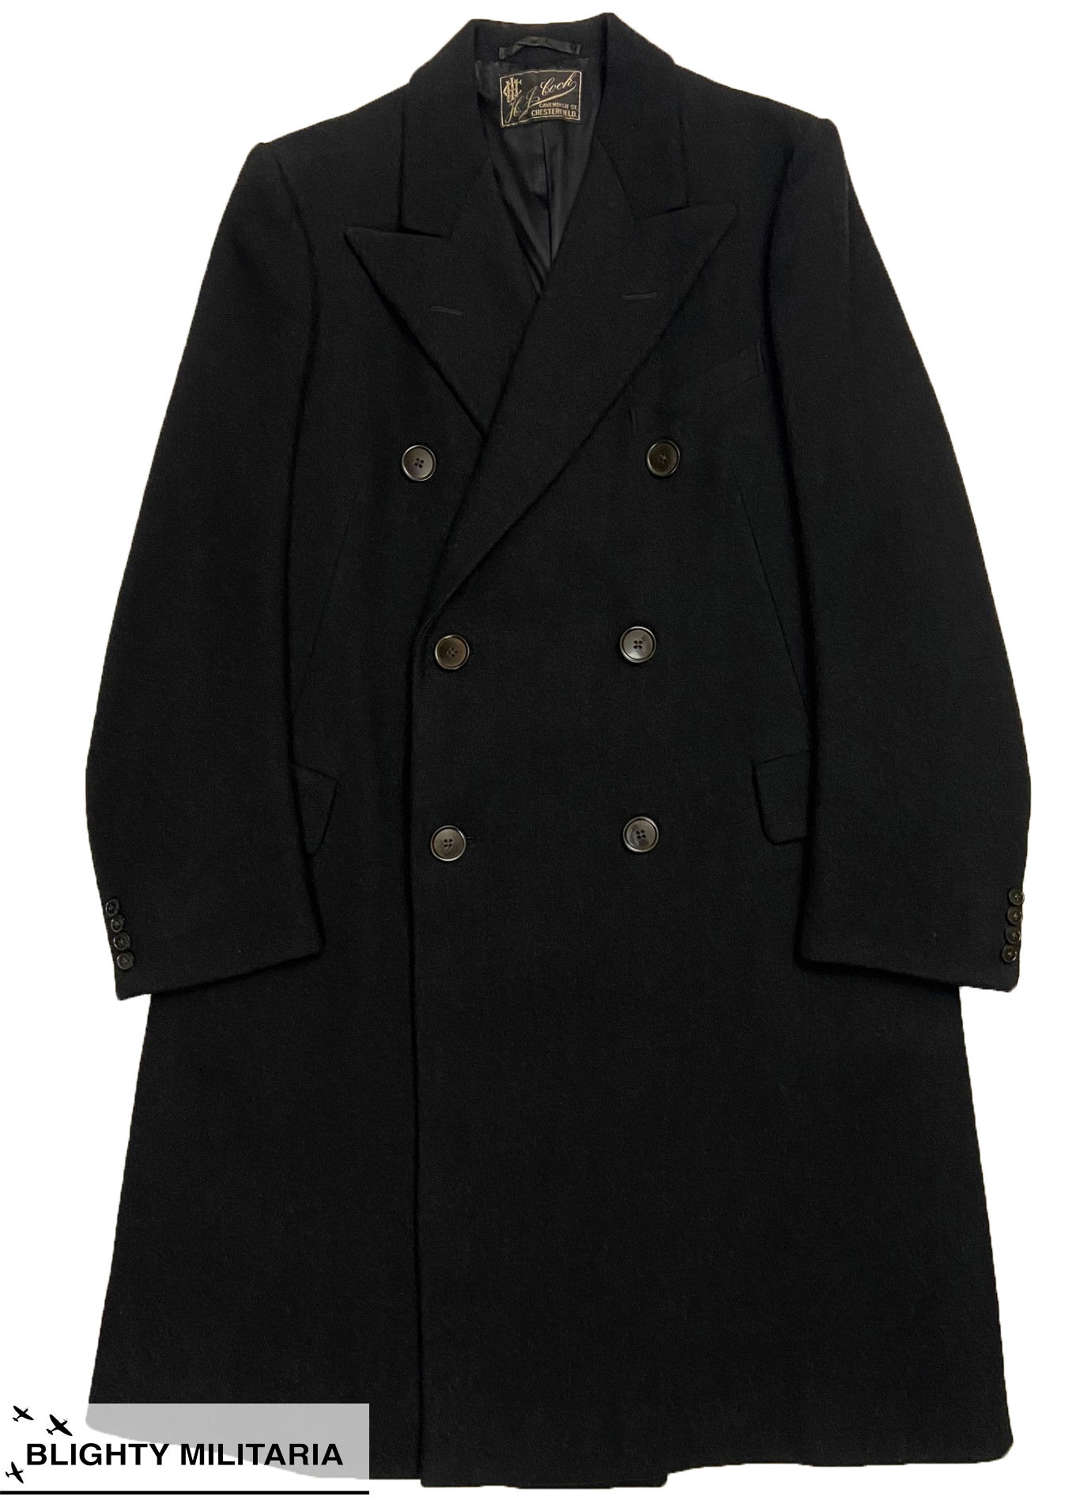 Original 1930s Men's Double Breasted Overcoat by 'H. J. Cook'